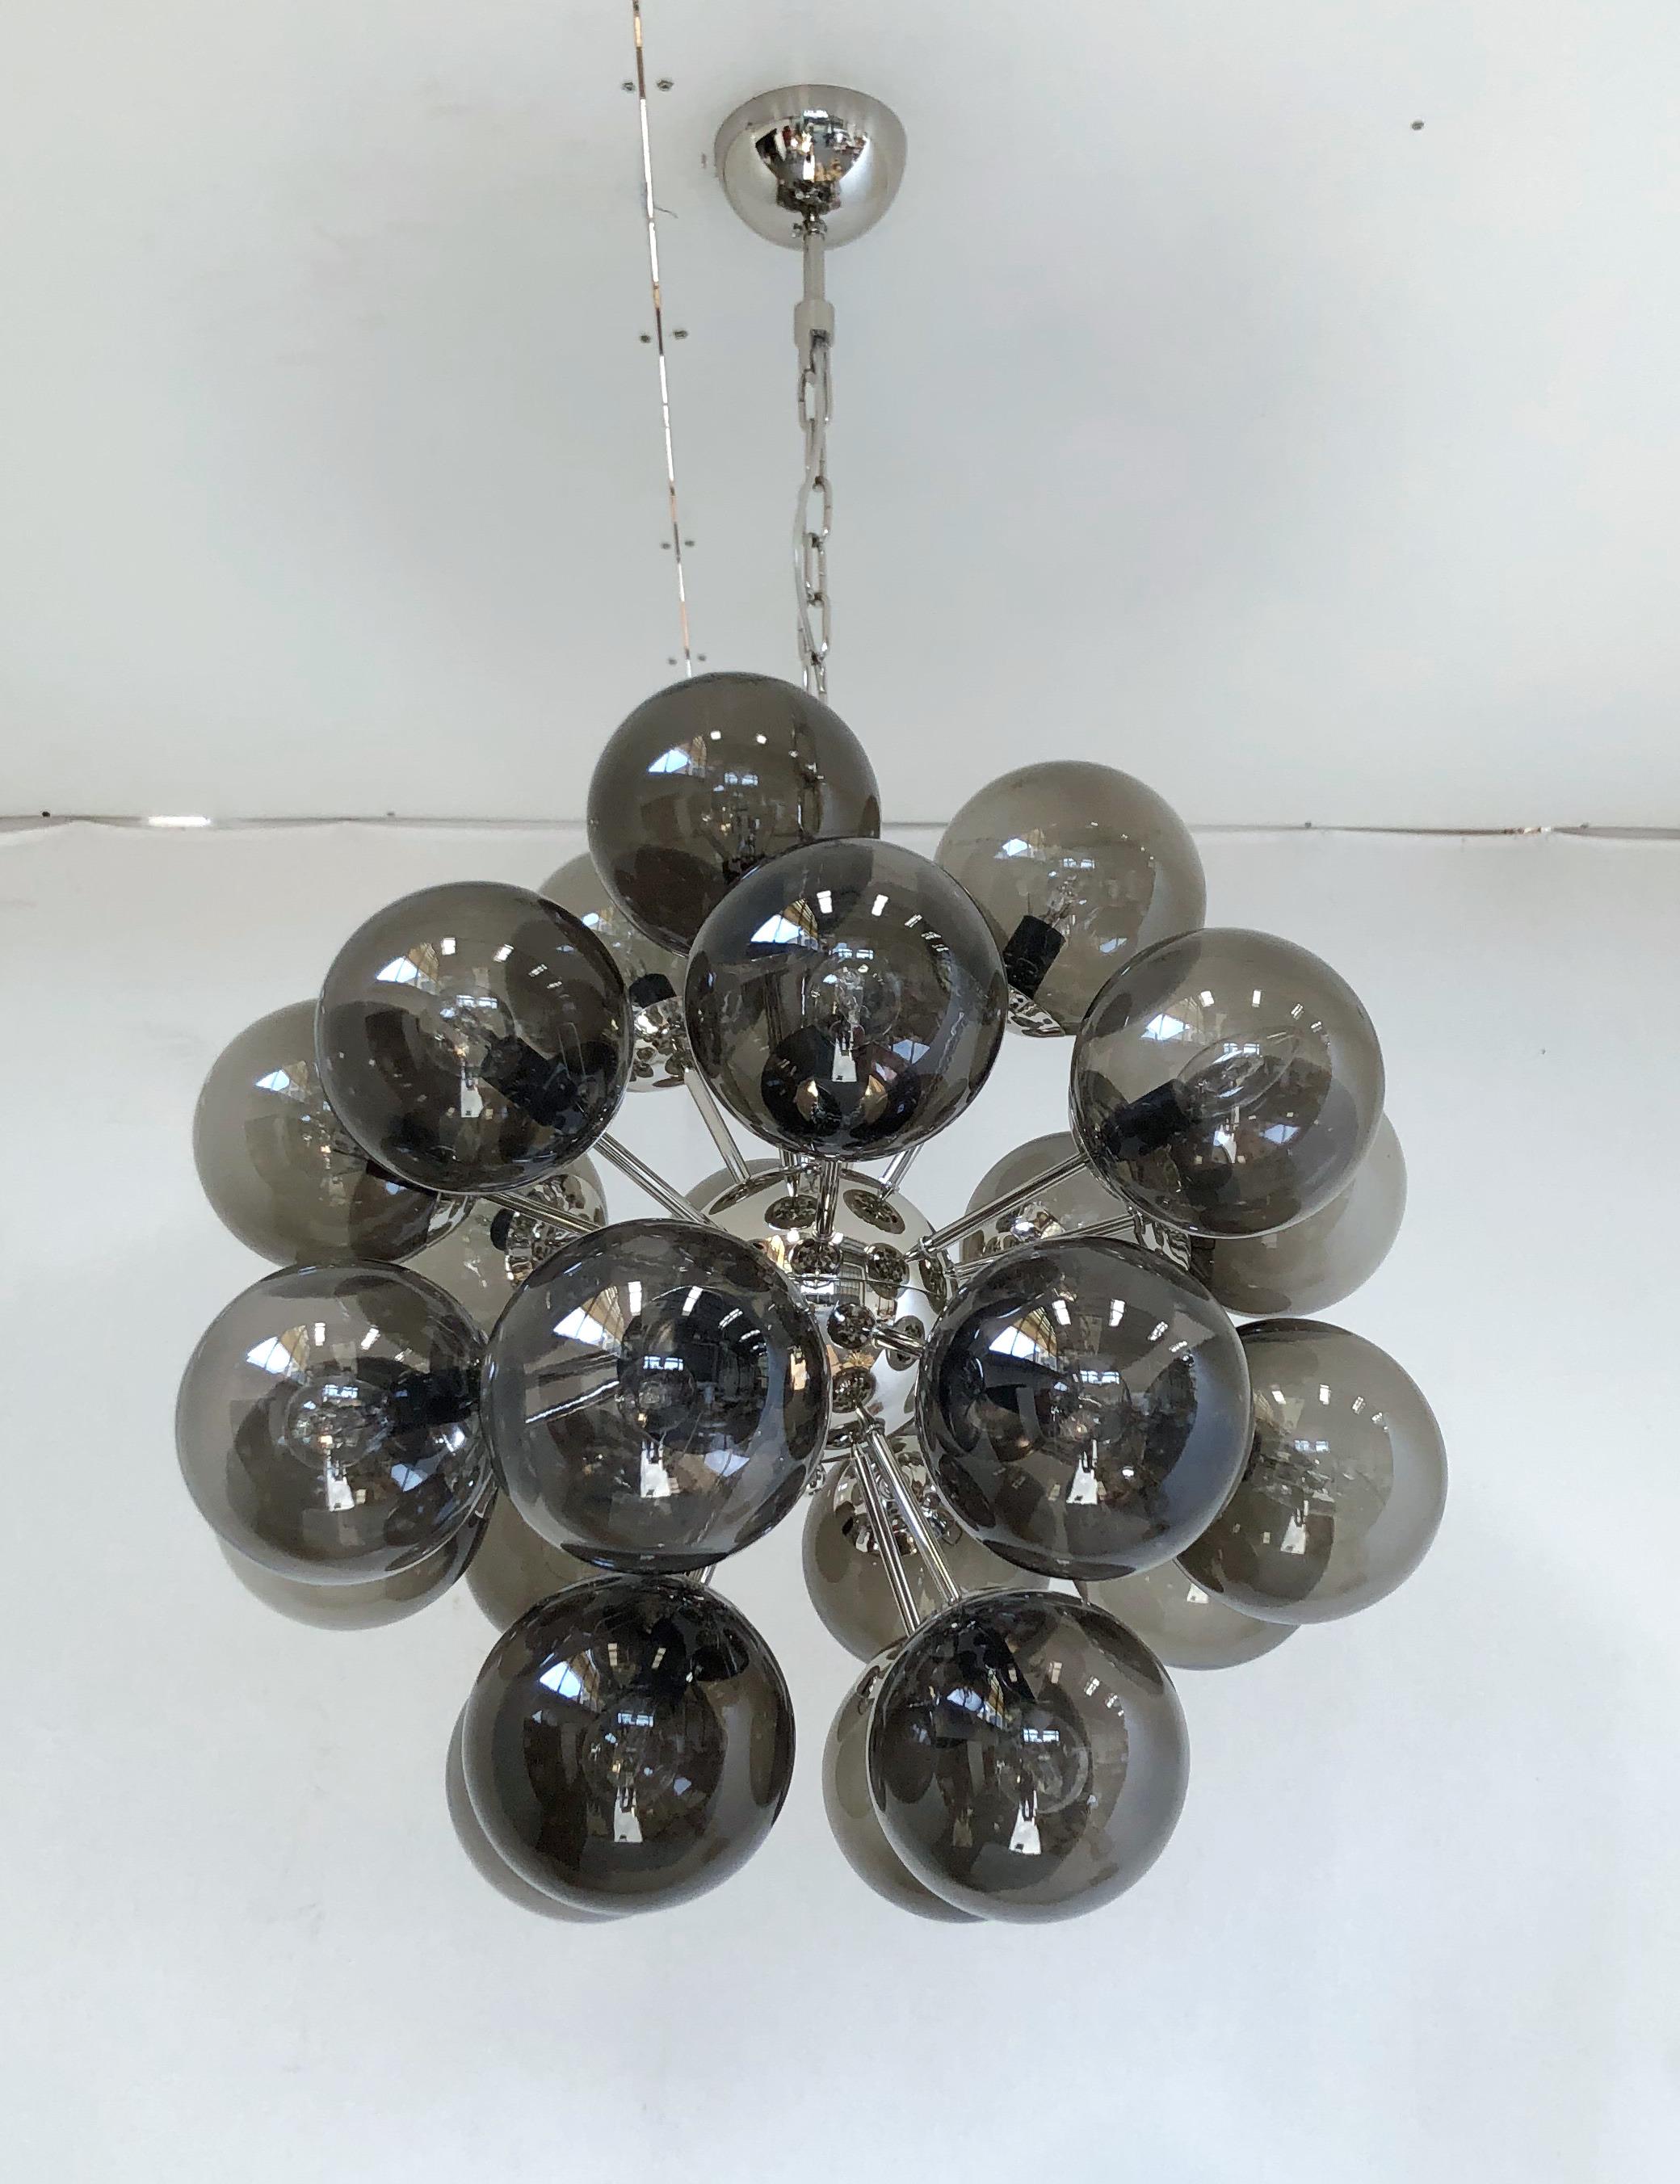 Italian sputnik chandelier with 24 Murano glass globes mounted on metal frame in polished nickel finish / designed by Fabio Bergomi for Fabio Ltd / Made in Italy
24 lights / E12 or E14 type / max 40W each
Measures: Diameter 27.5 inches, height 27.5